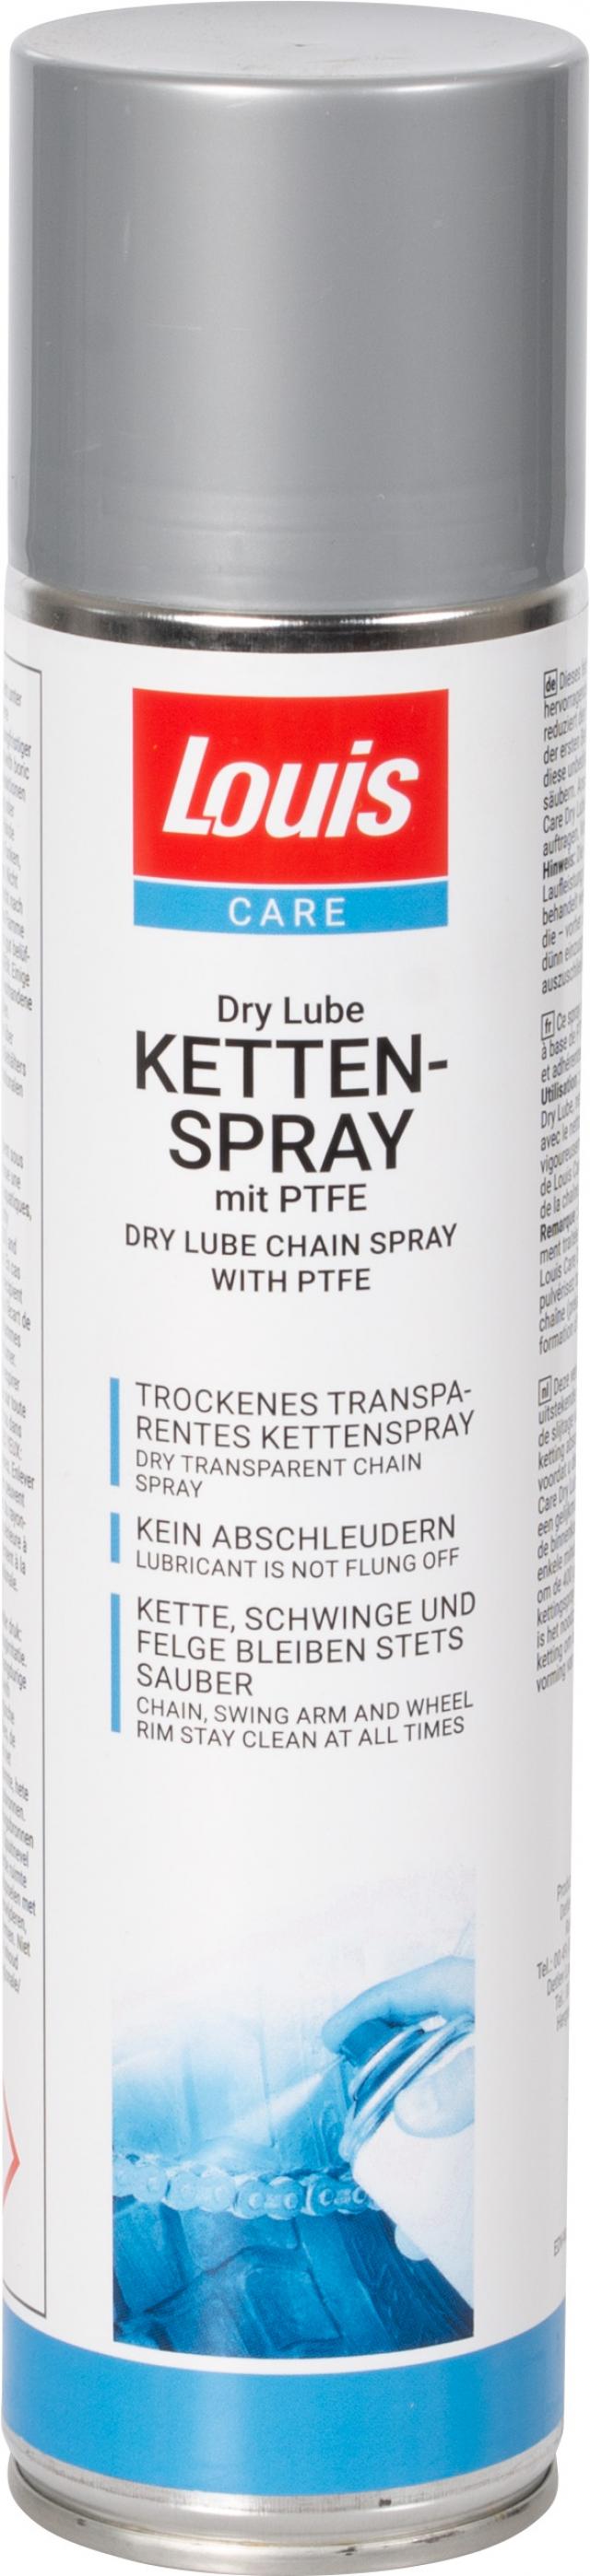 LOUIS CARE DRY LUBE CHAIN SPRAY CONTAINS: 400 ML